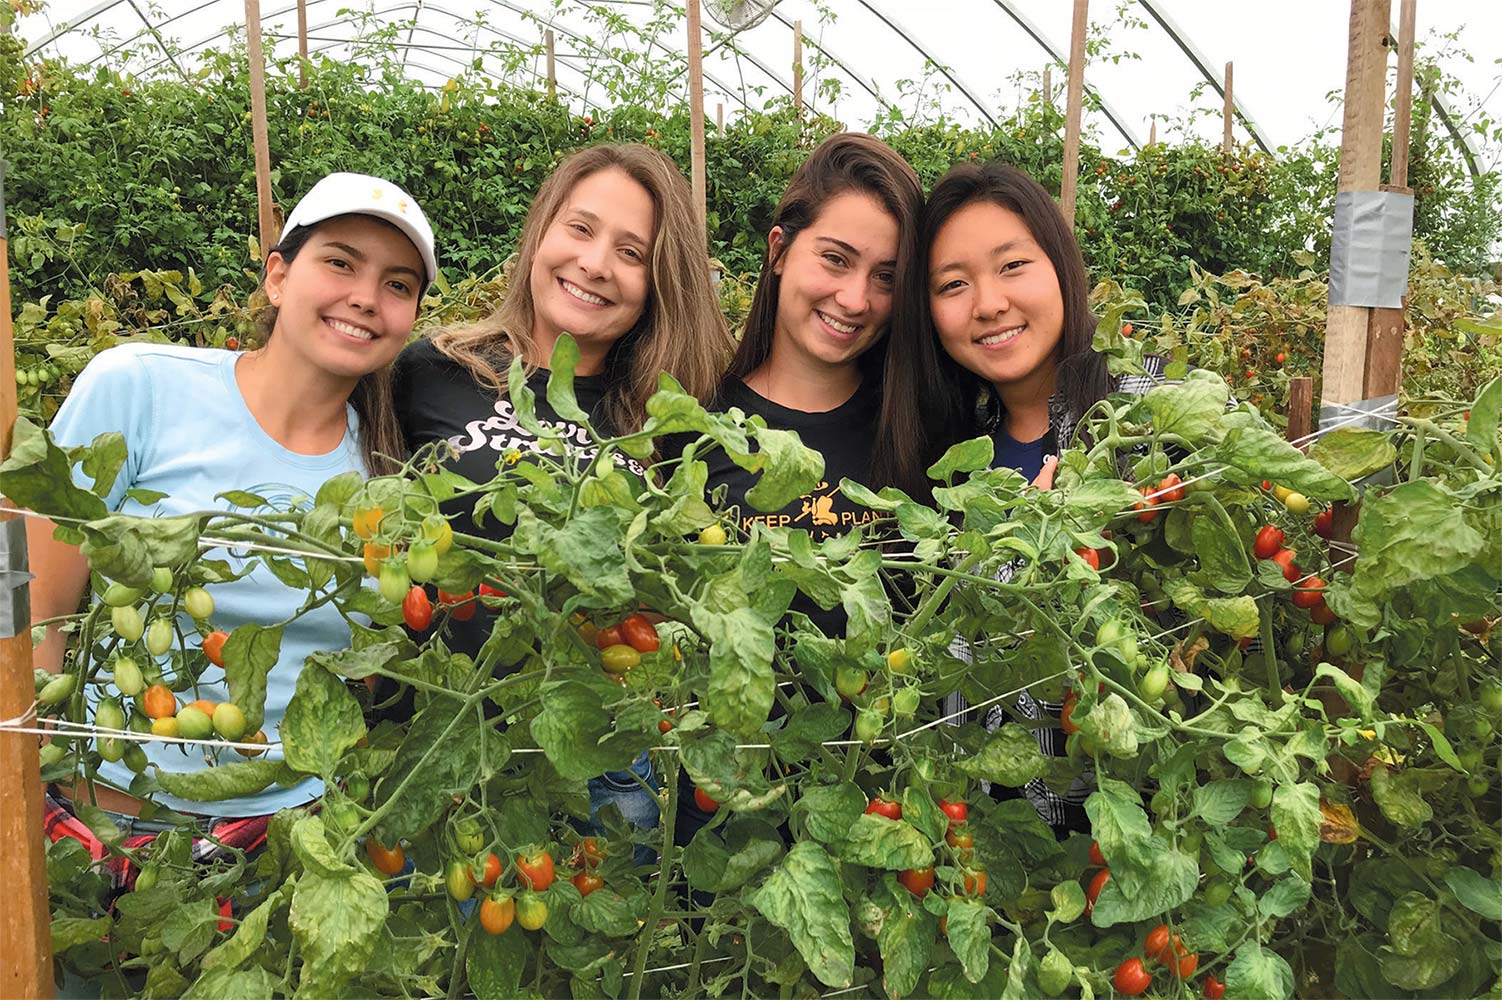 These four ladies from South America are working at Sully’s Produce this summer on a J-1 Exchange program. From left, Nathalia Gutierrez, Naiara Sousa, Isabella Vieira and Natasha Umezu.